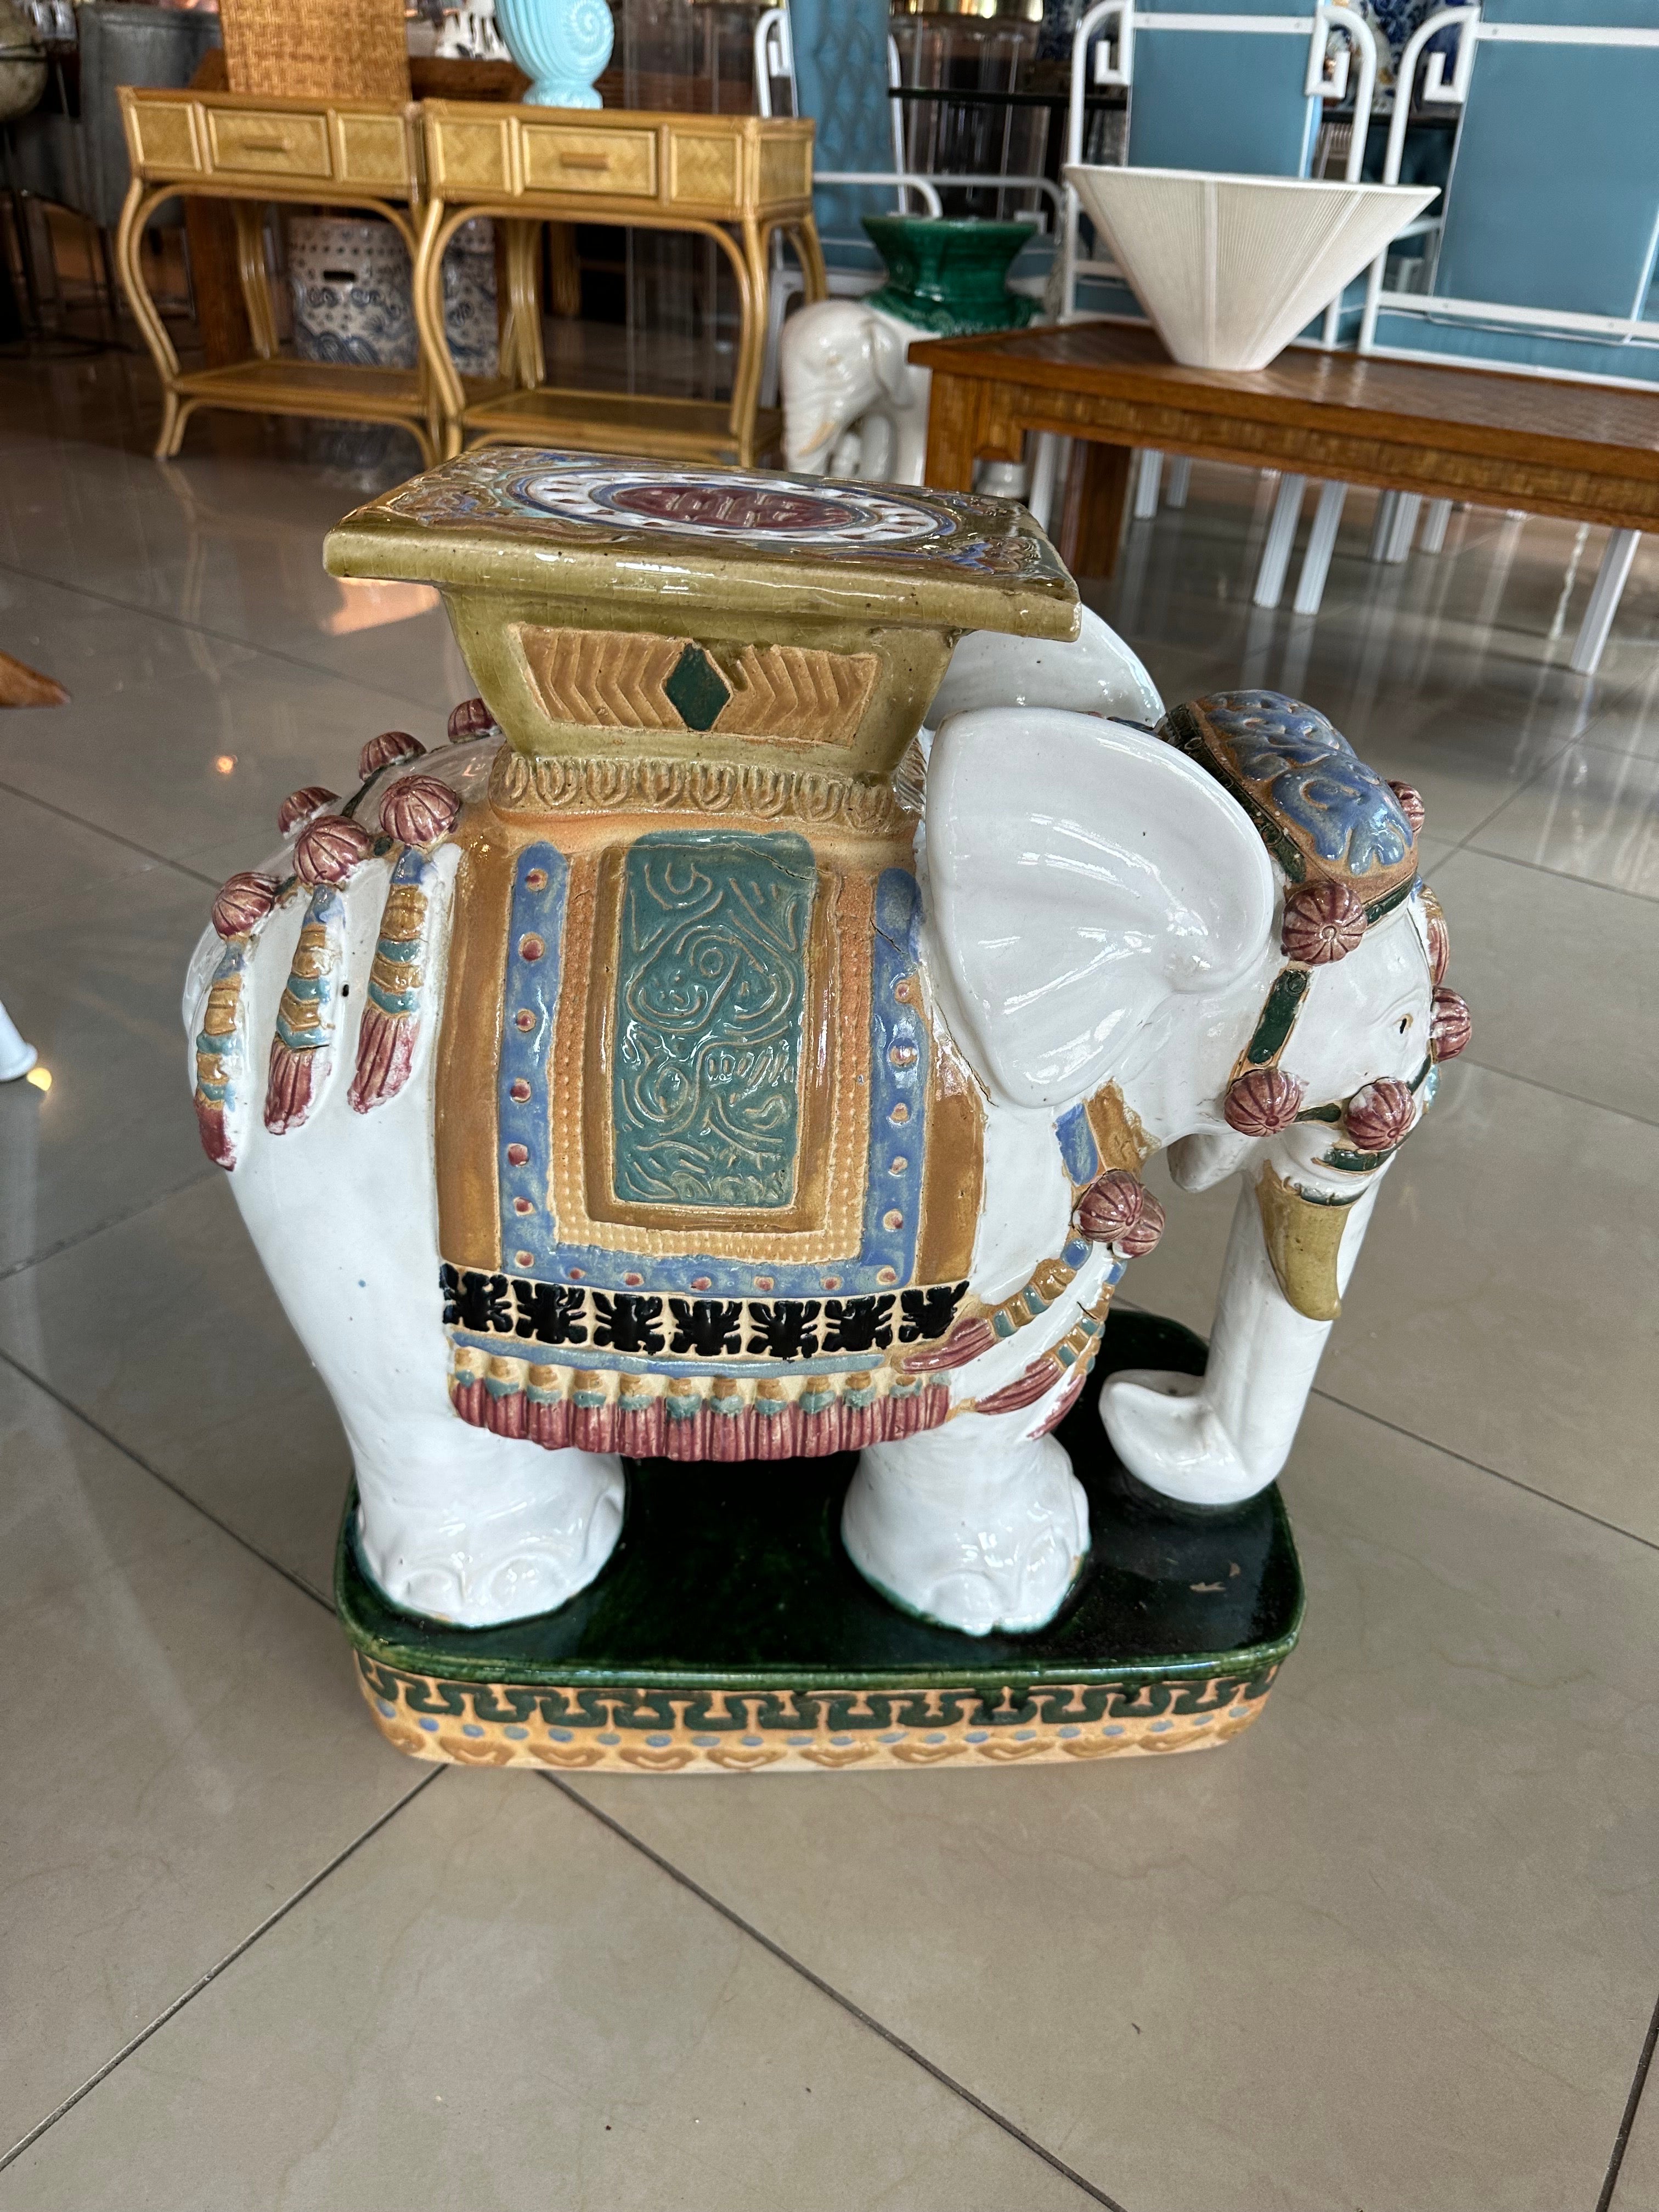 Vintage ceramic elephant garden stool stand side table. No chips or breaks. Dimensions: 22.5 H x 20 w x 10 D.